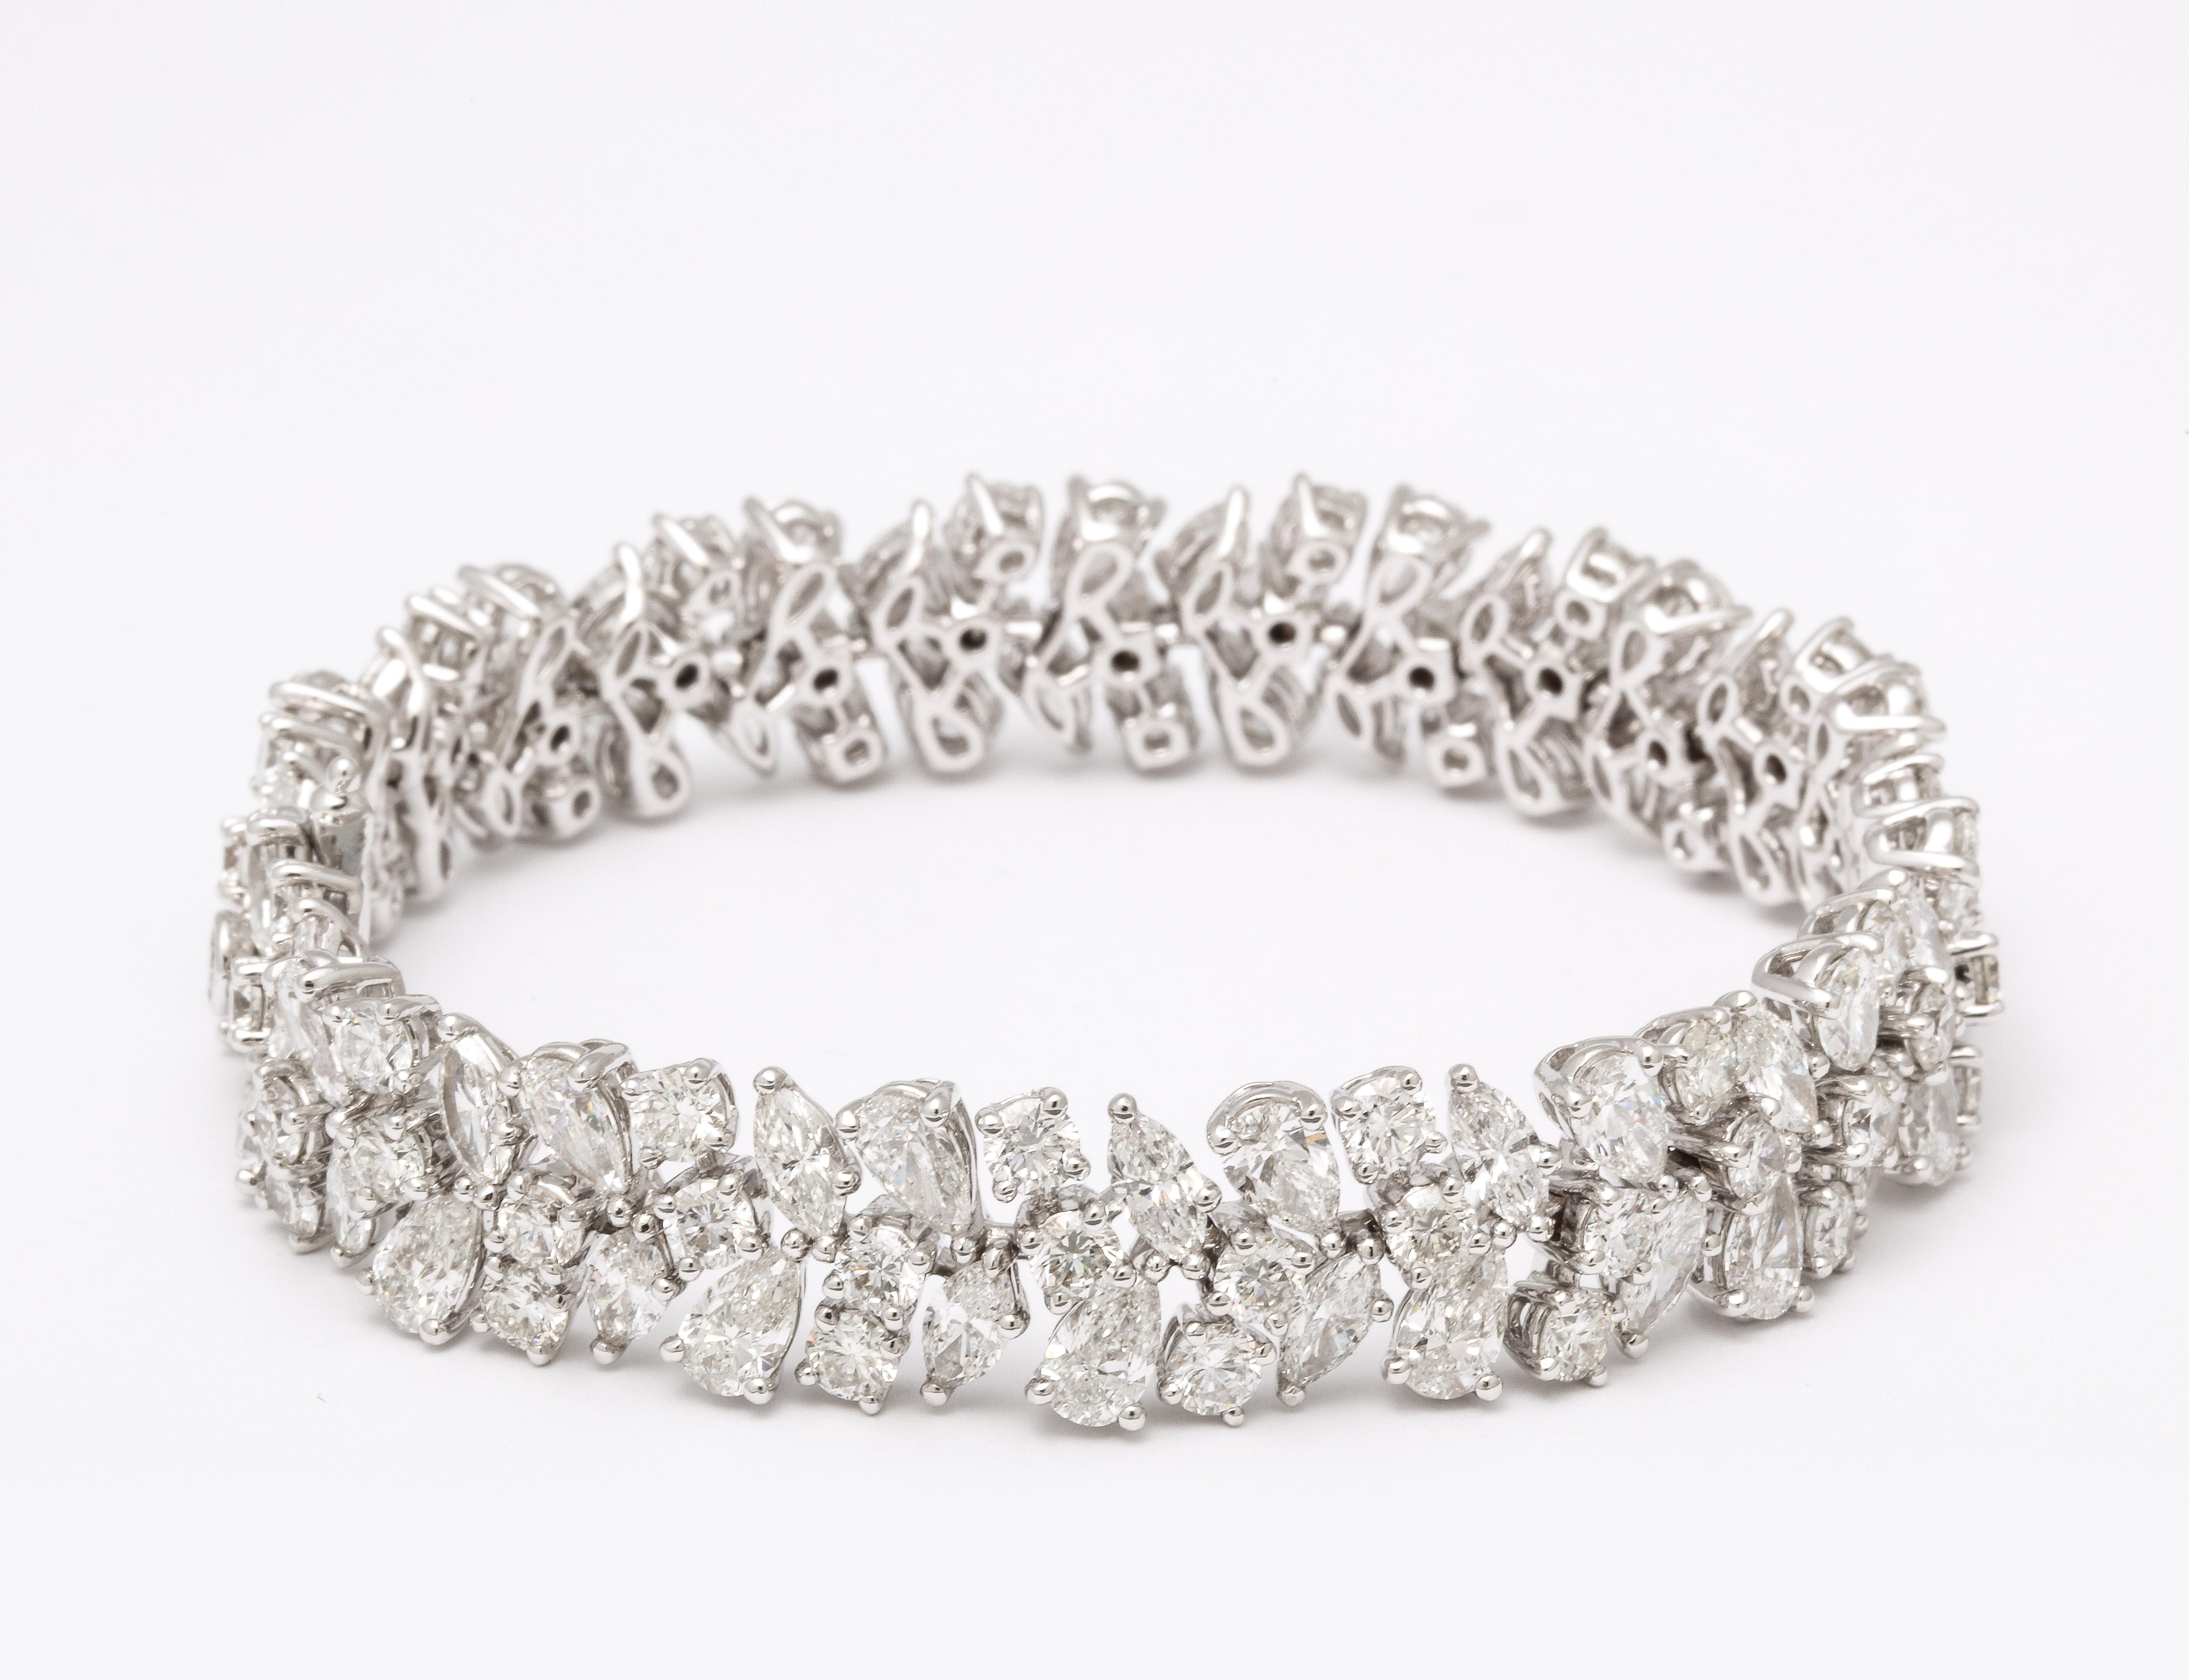 
The perfect bracelet, designed to compliment pieces in your existing collection. 

25.17 carats of white pear, round and marquise cut diamonds set in 18k white gold. 

Approximately 7.10 inches long. Just under half an inch wide. 

A timeless